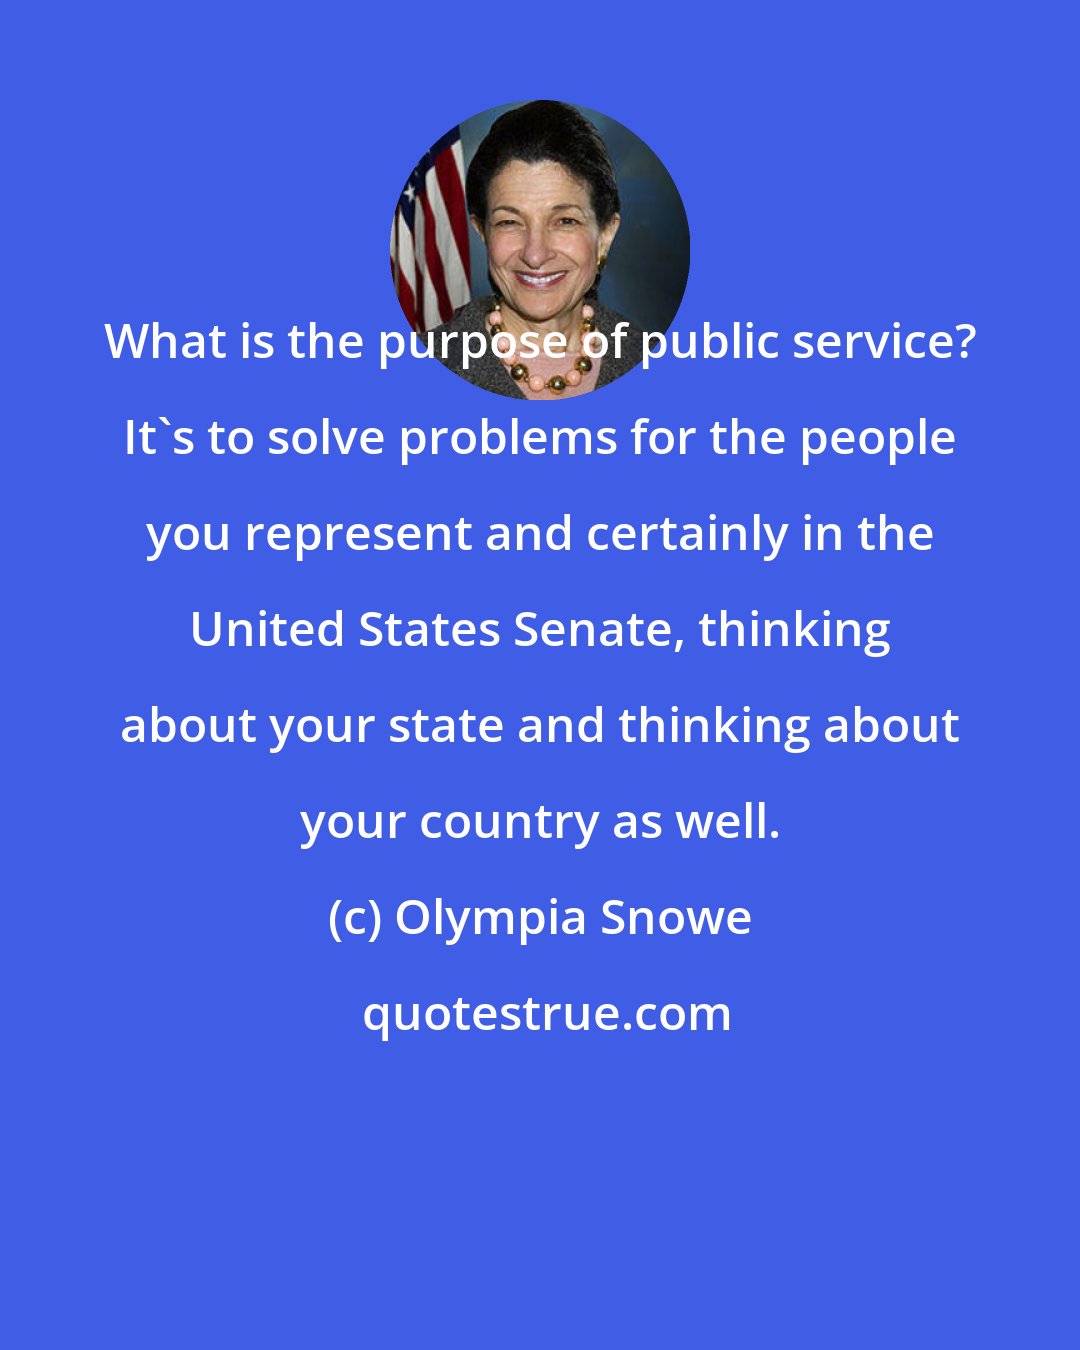 Olympia Snowe: What is the purpose of public service? It's to solve problems for the people you represent and certainly in the United States Senate, thinking about your state and thinking about your country as well.